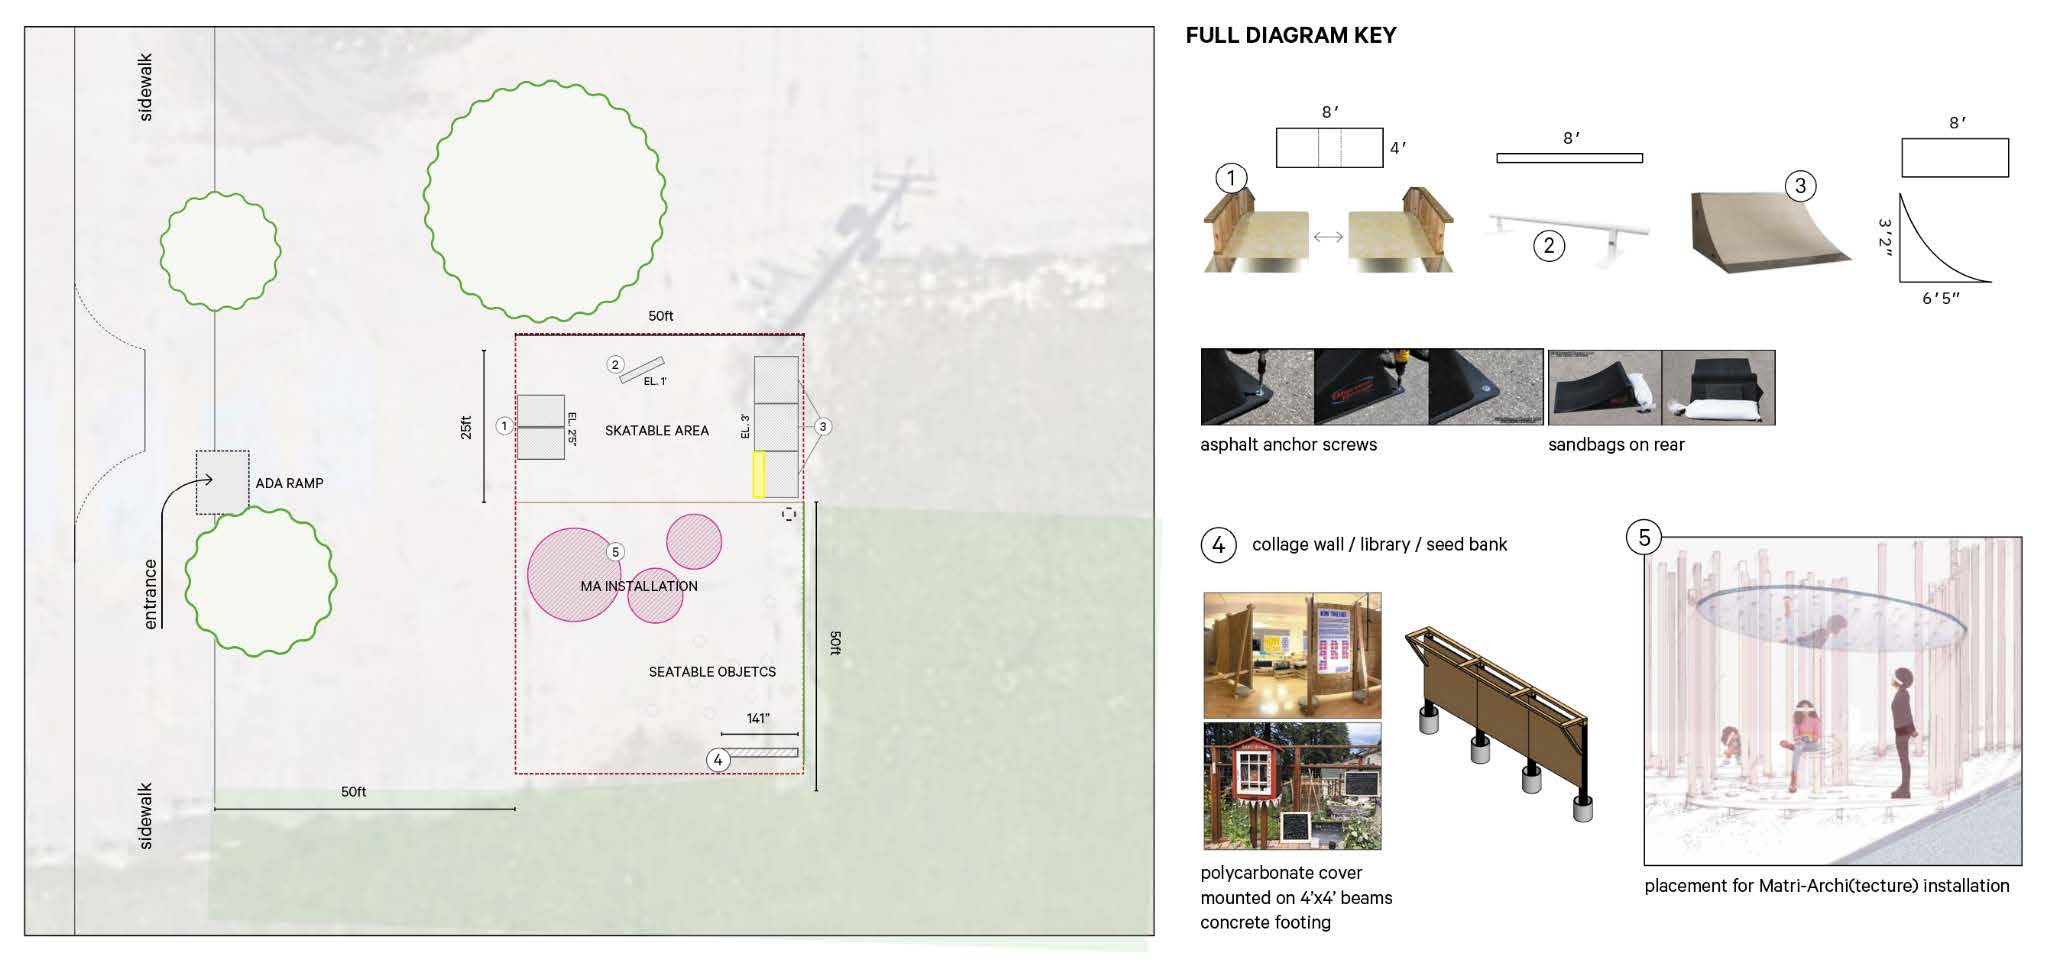 Figure 3. Image of Site plan featuring pre-fabricated items, collage wall, and the Matri-Archi(tecture) installation.